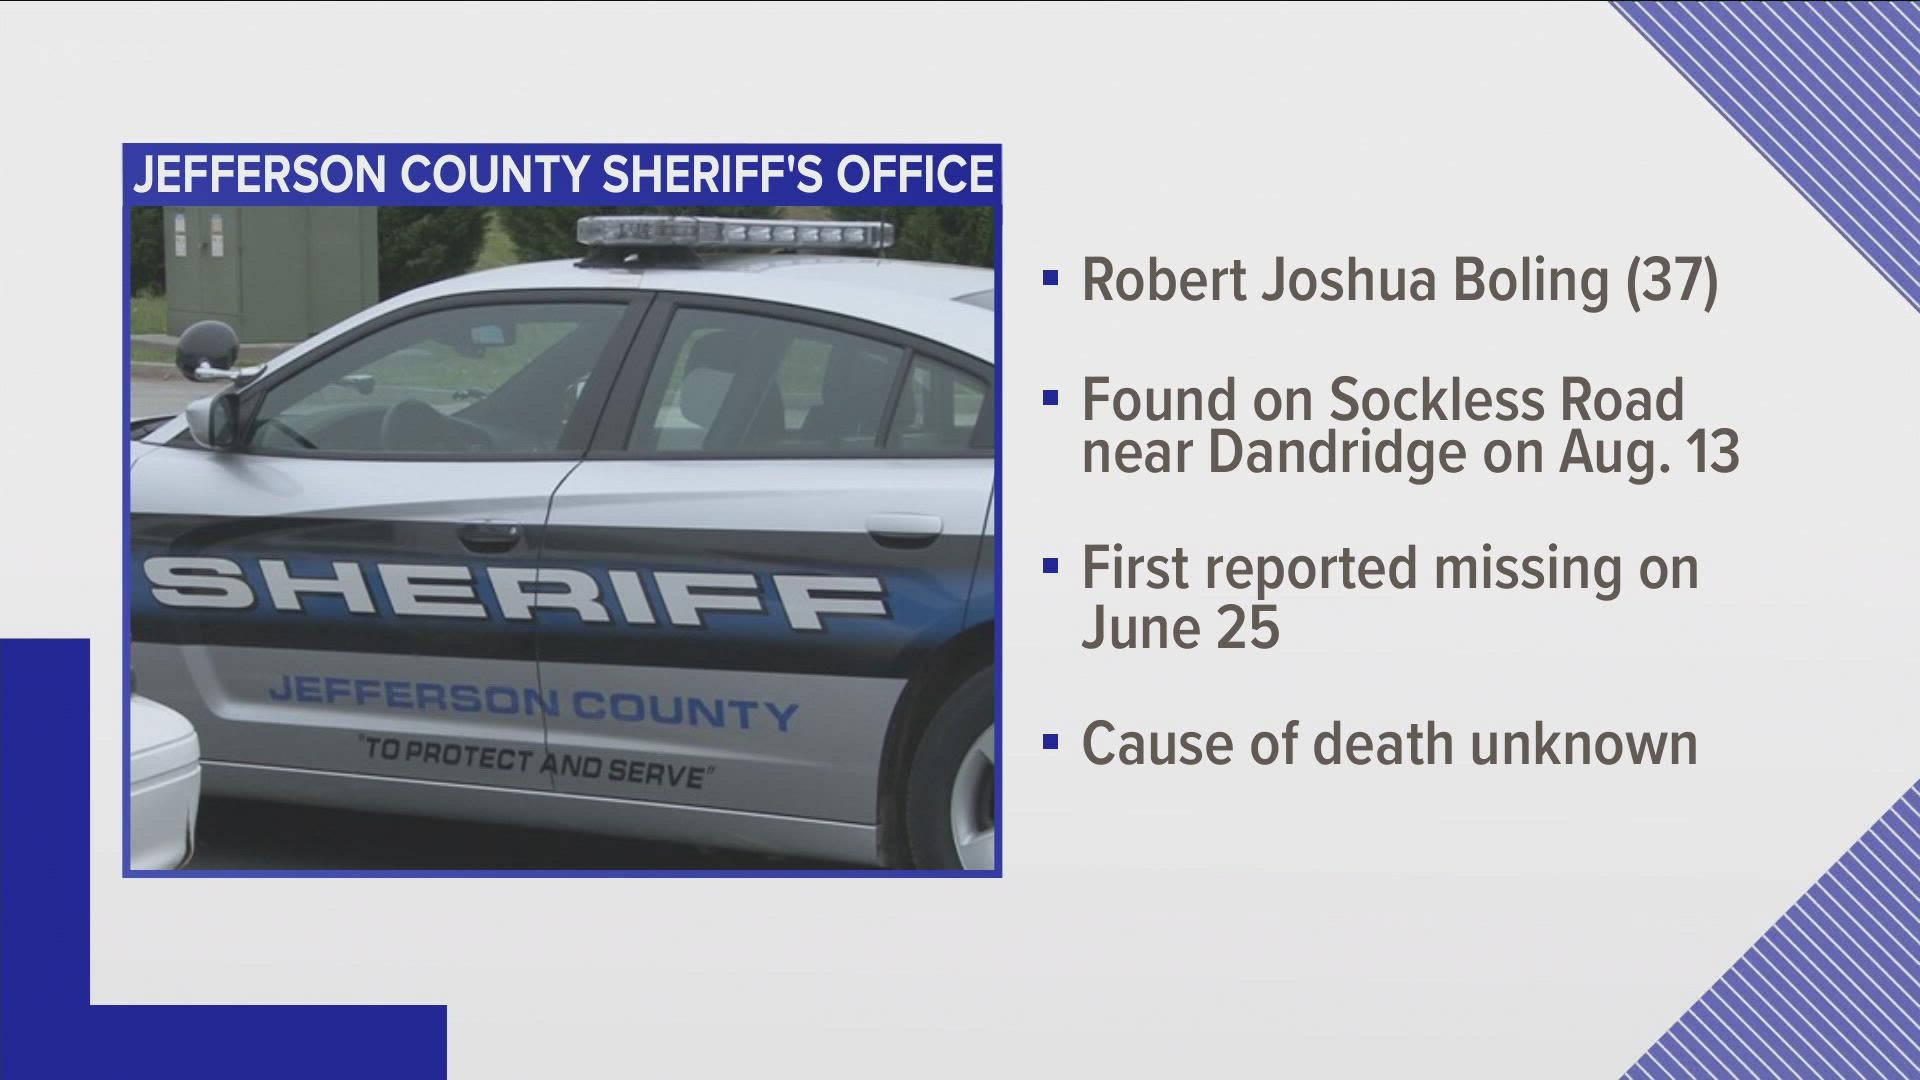 Authorities have confirmed that human skeletal remains found in Jefferson County belong to 37-year-old Robert Boling.